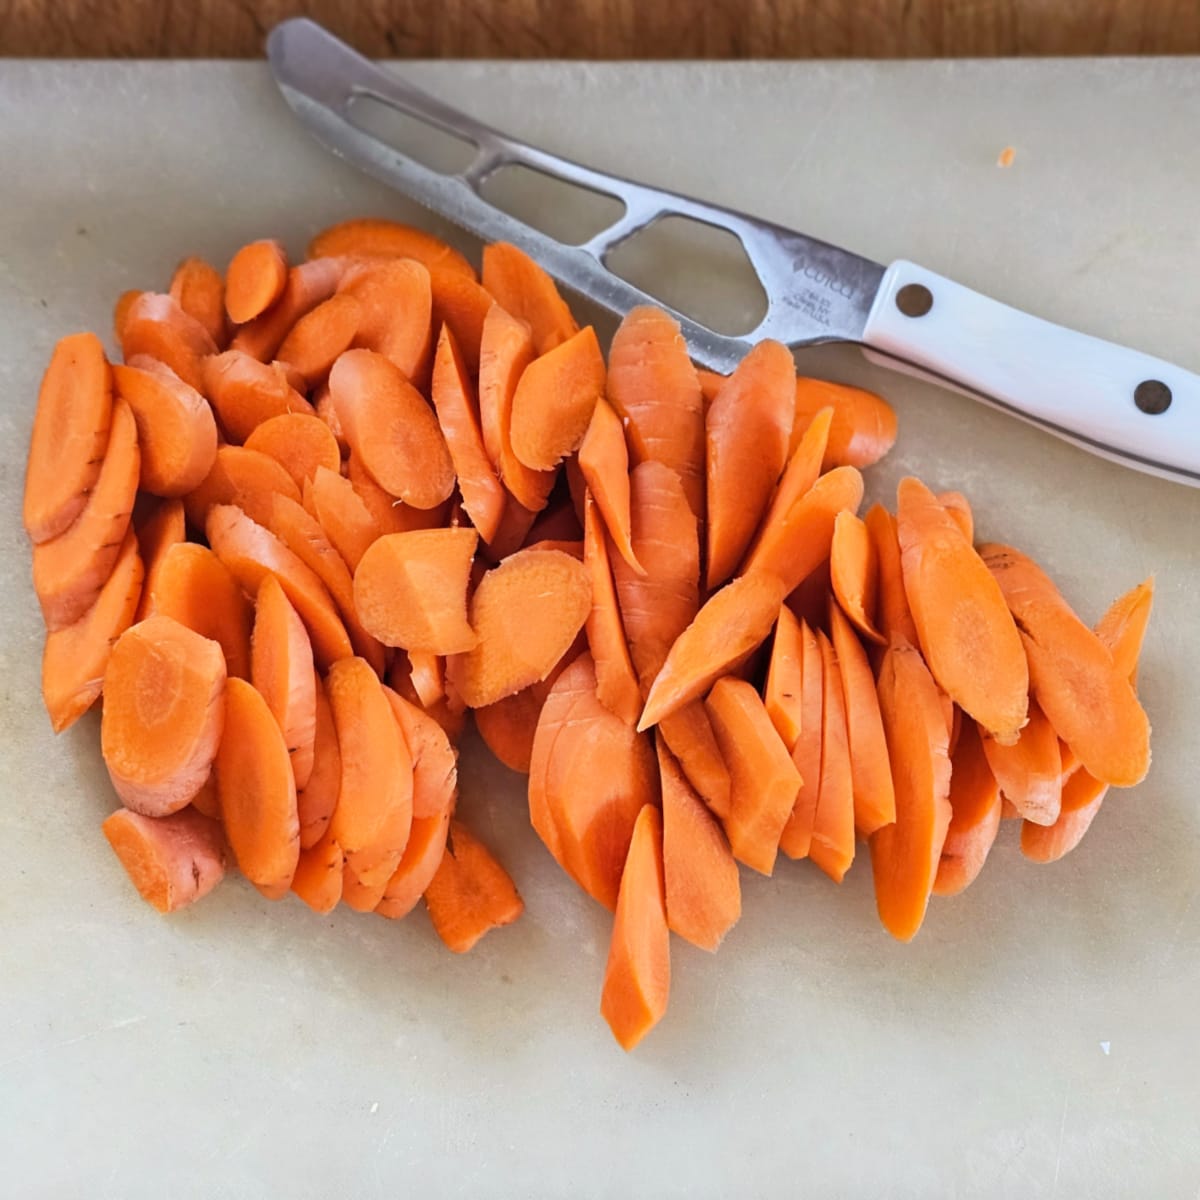 Cutting carrots on a cutting board with a white cheese knife